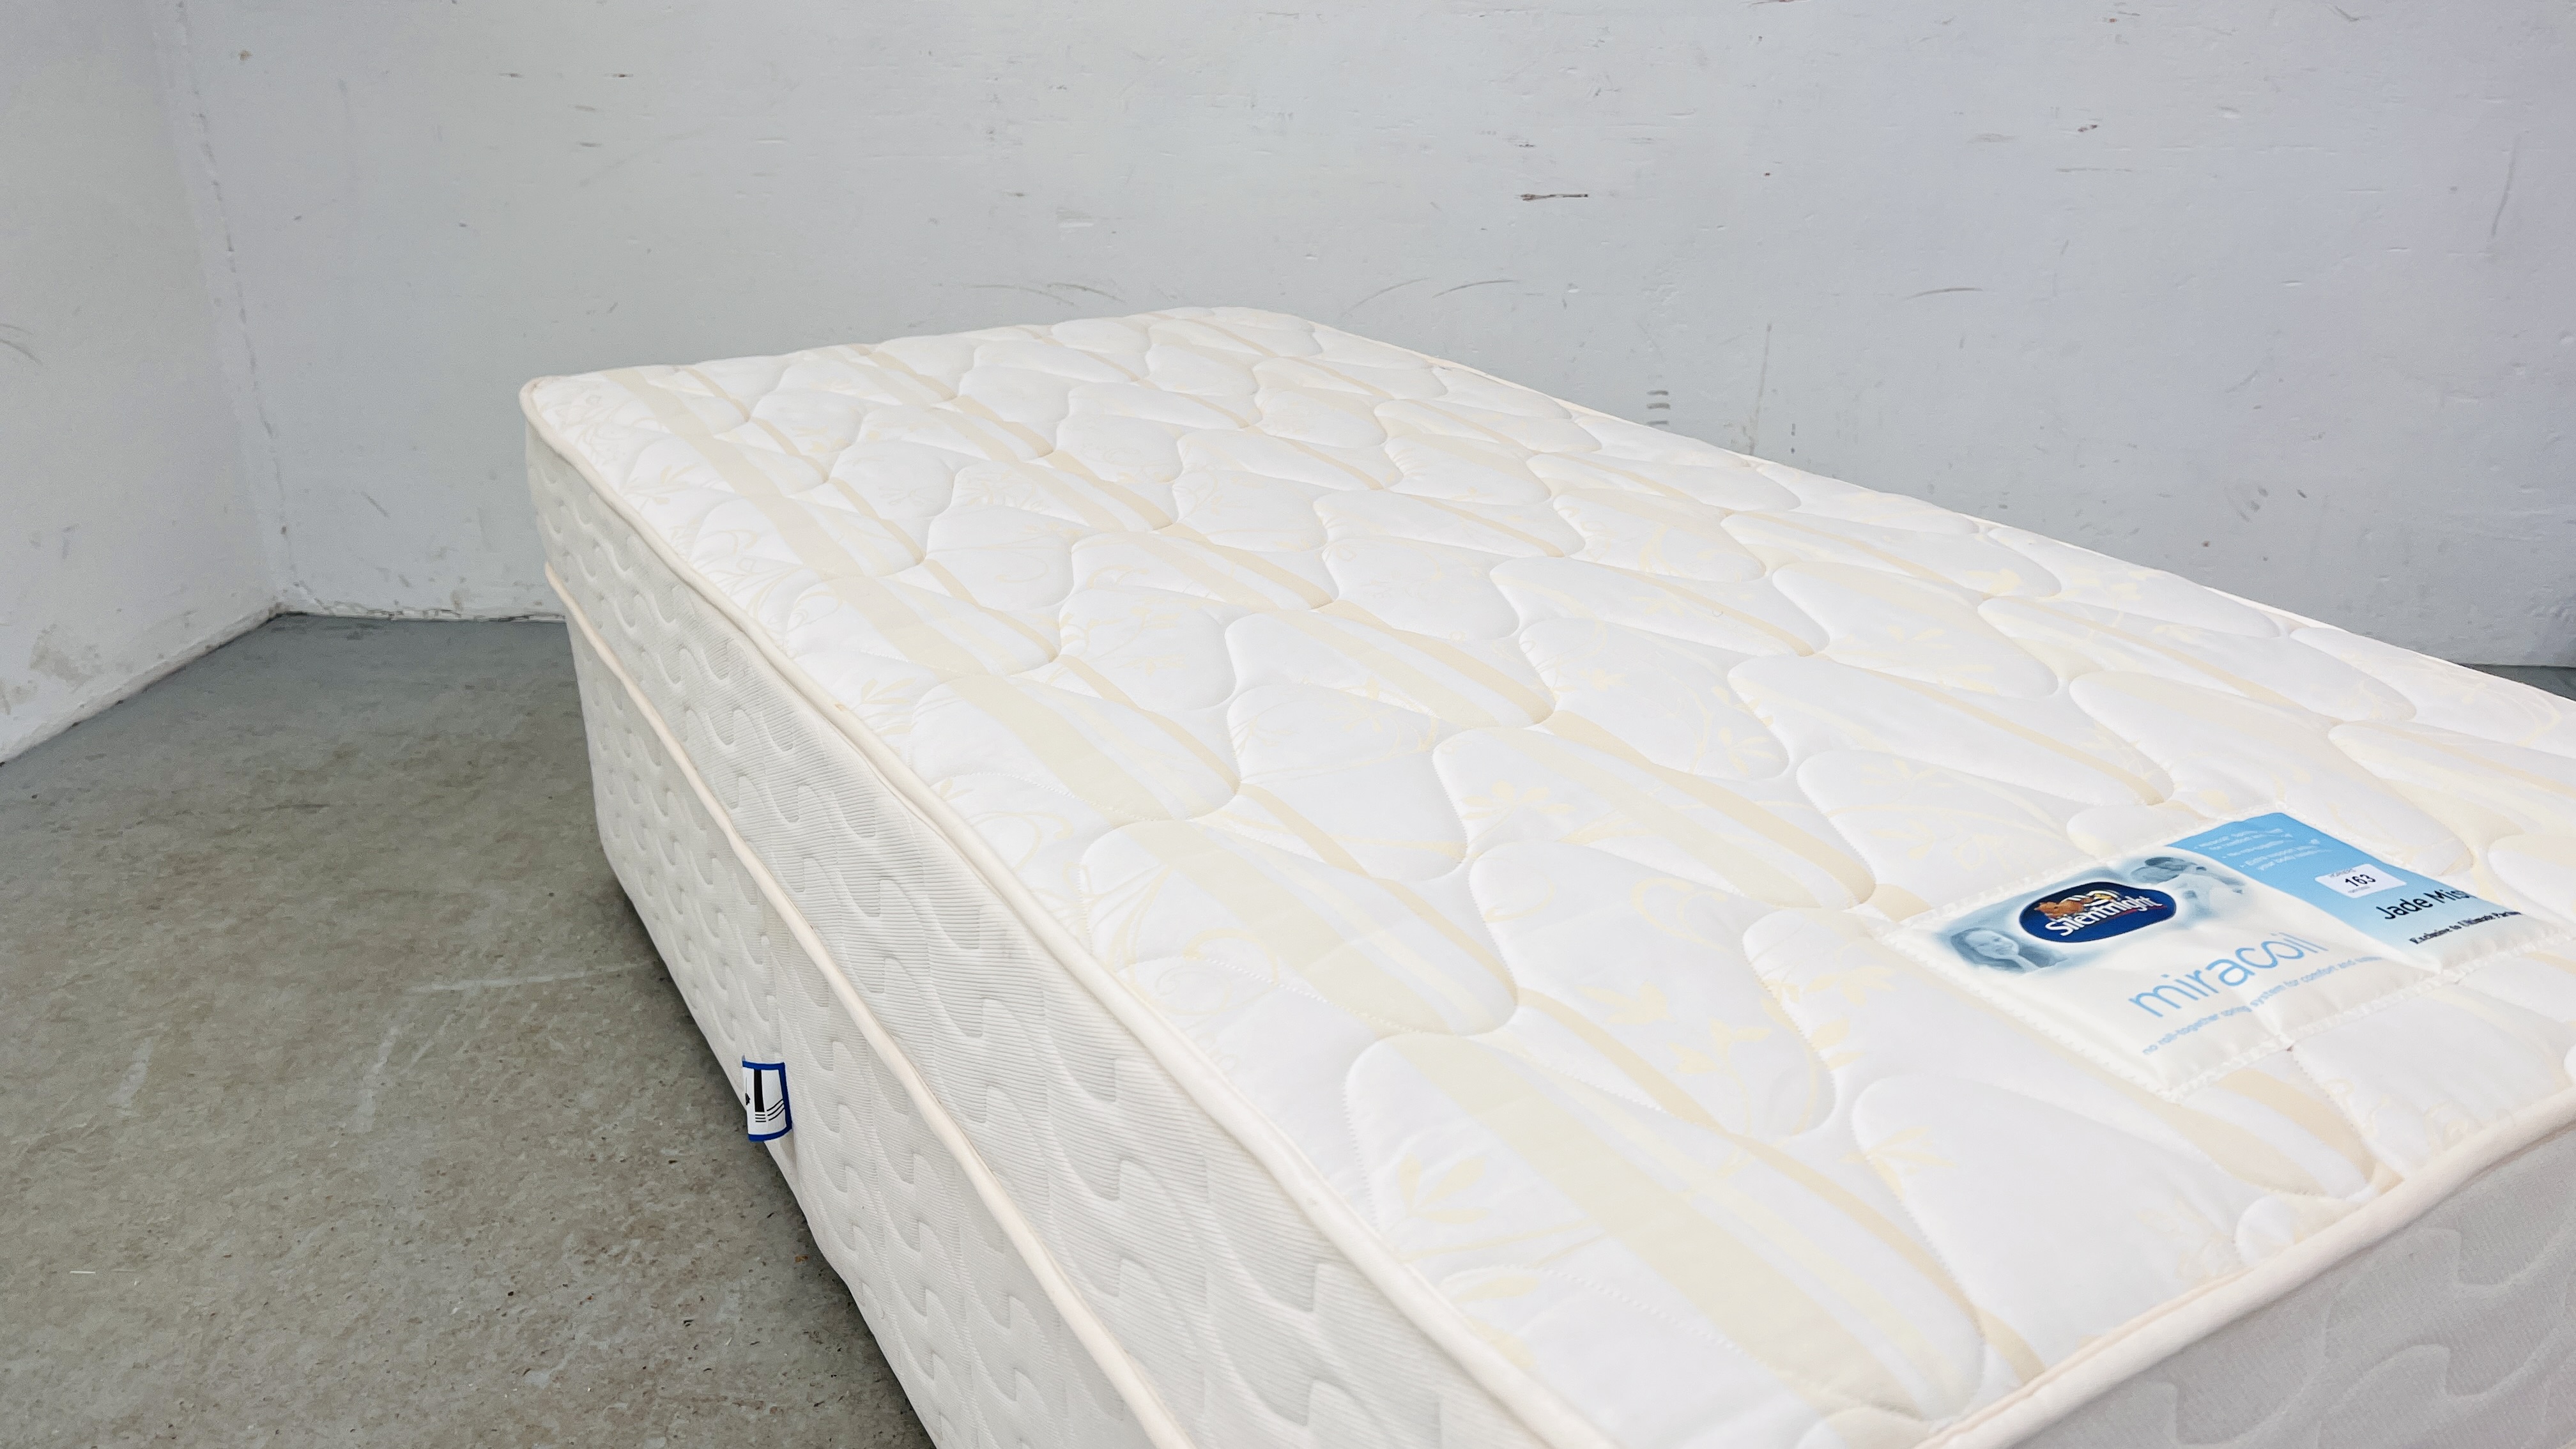 SILENTNIGHT SINGLE DIVAN BED DRAWER BASE JADE MIST MIRACOILE MATTRESS ALONG WITH A BUTTON BACK - Image 6 of 13